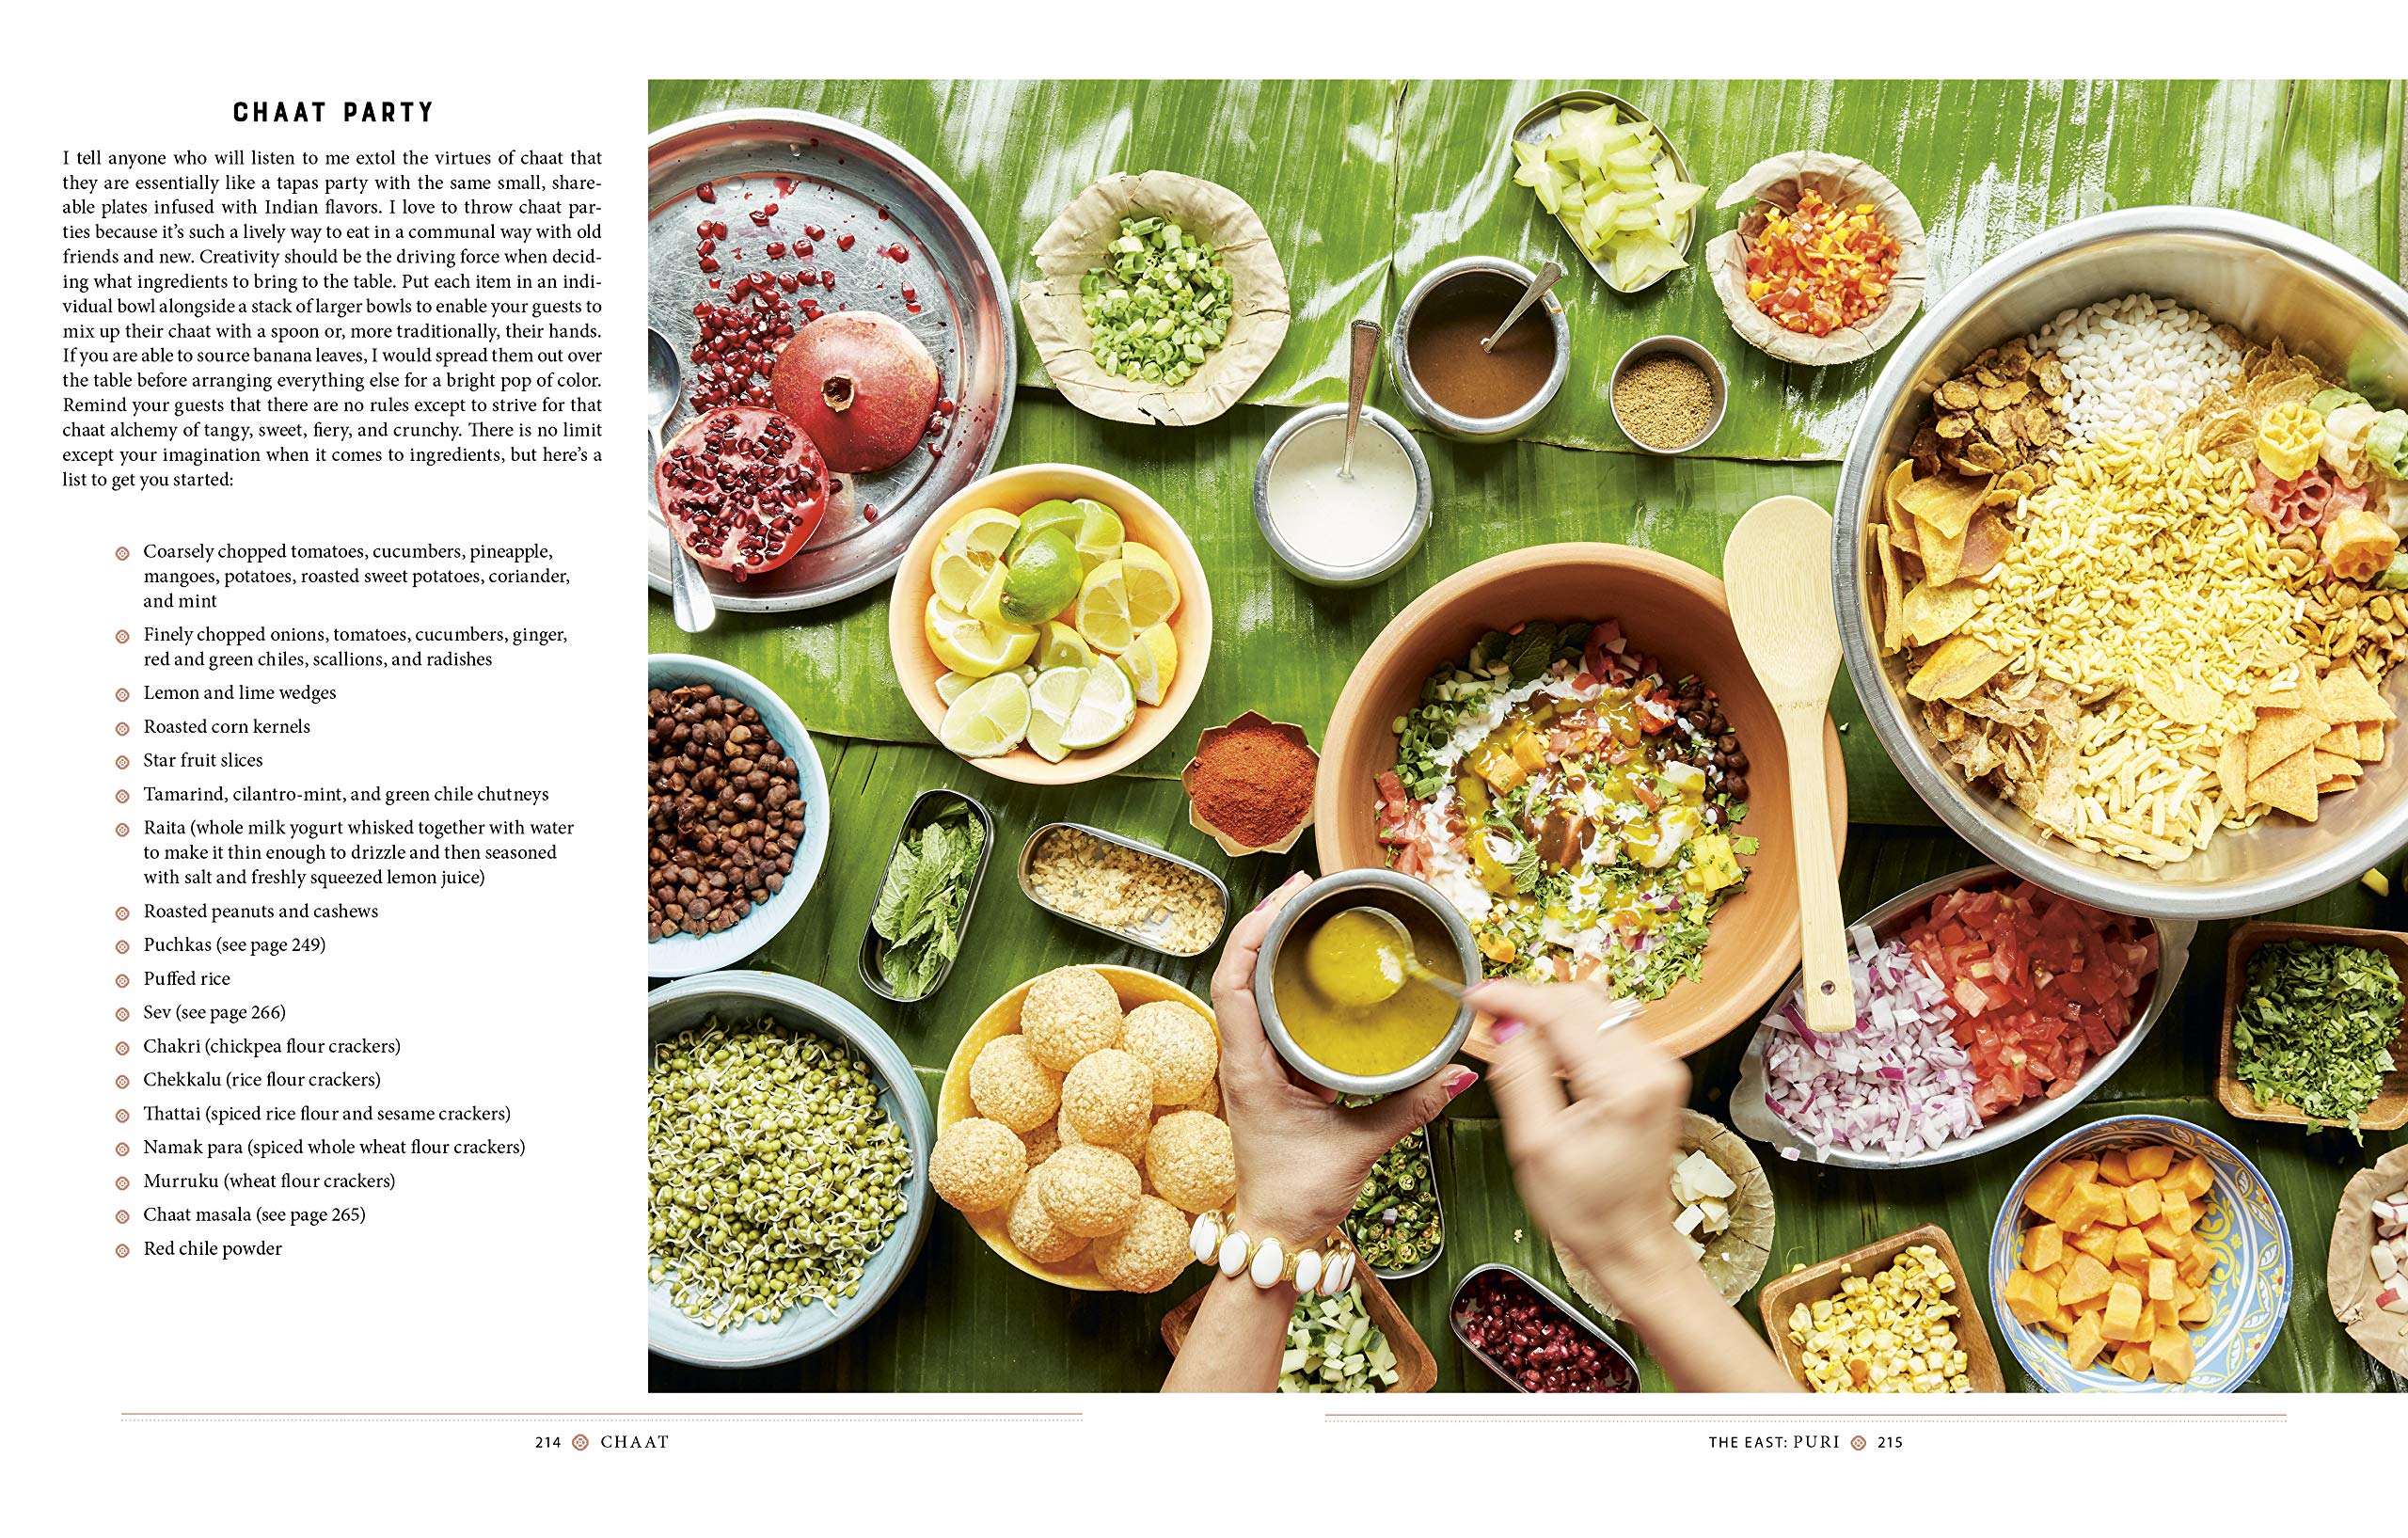 Chaat: Recipes from the Kitchens, Markets, and Railways of India: A Cookbook